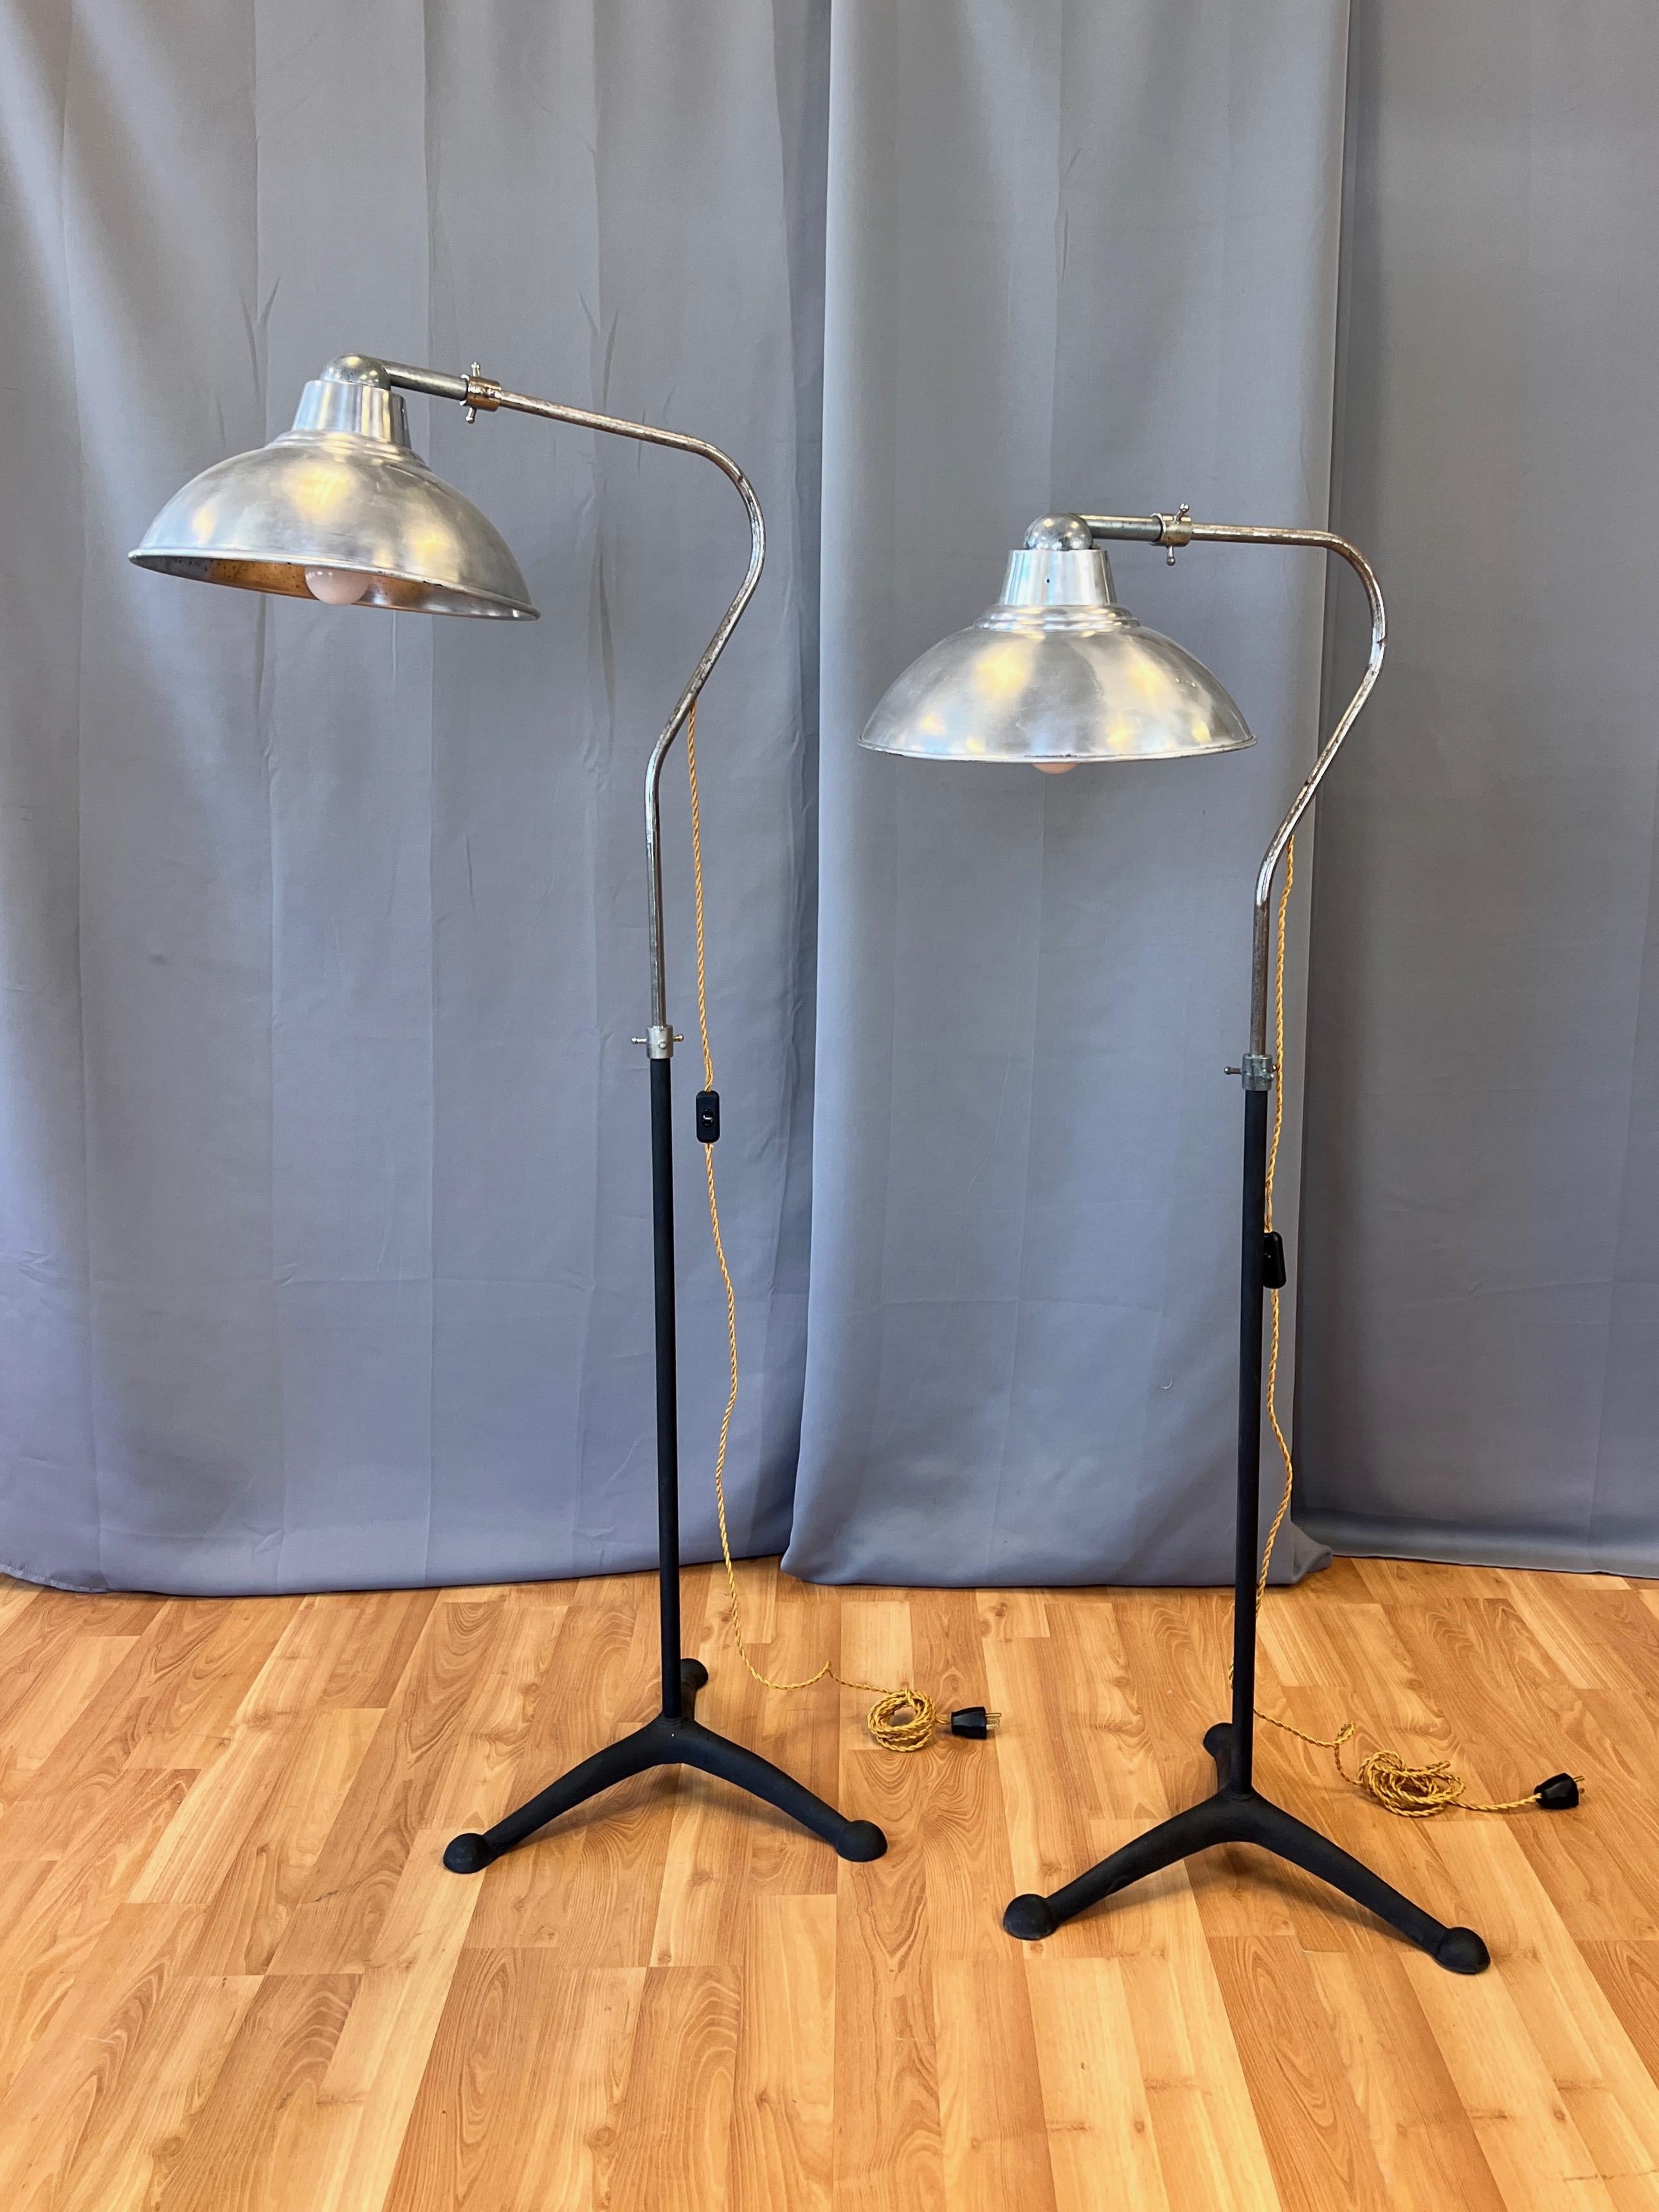 A rare pair of uncommon 1930s McCall’s Desert-Air industrial adjustable-height aluminum and cast iron floor lamps.

Fifteen-inch-diameter polished aluminum reflector shade with rotatable cast aluminum mount on bare metal gooseneck-shaped